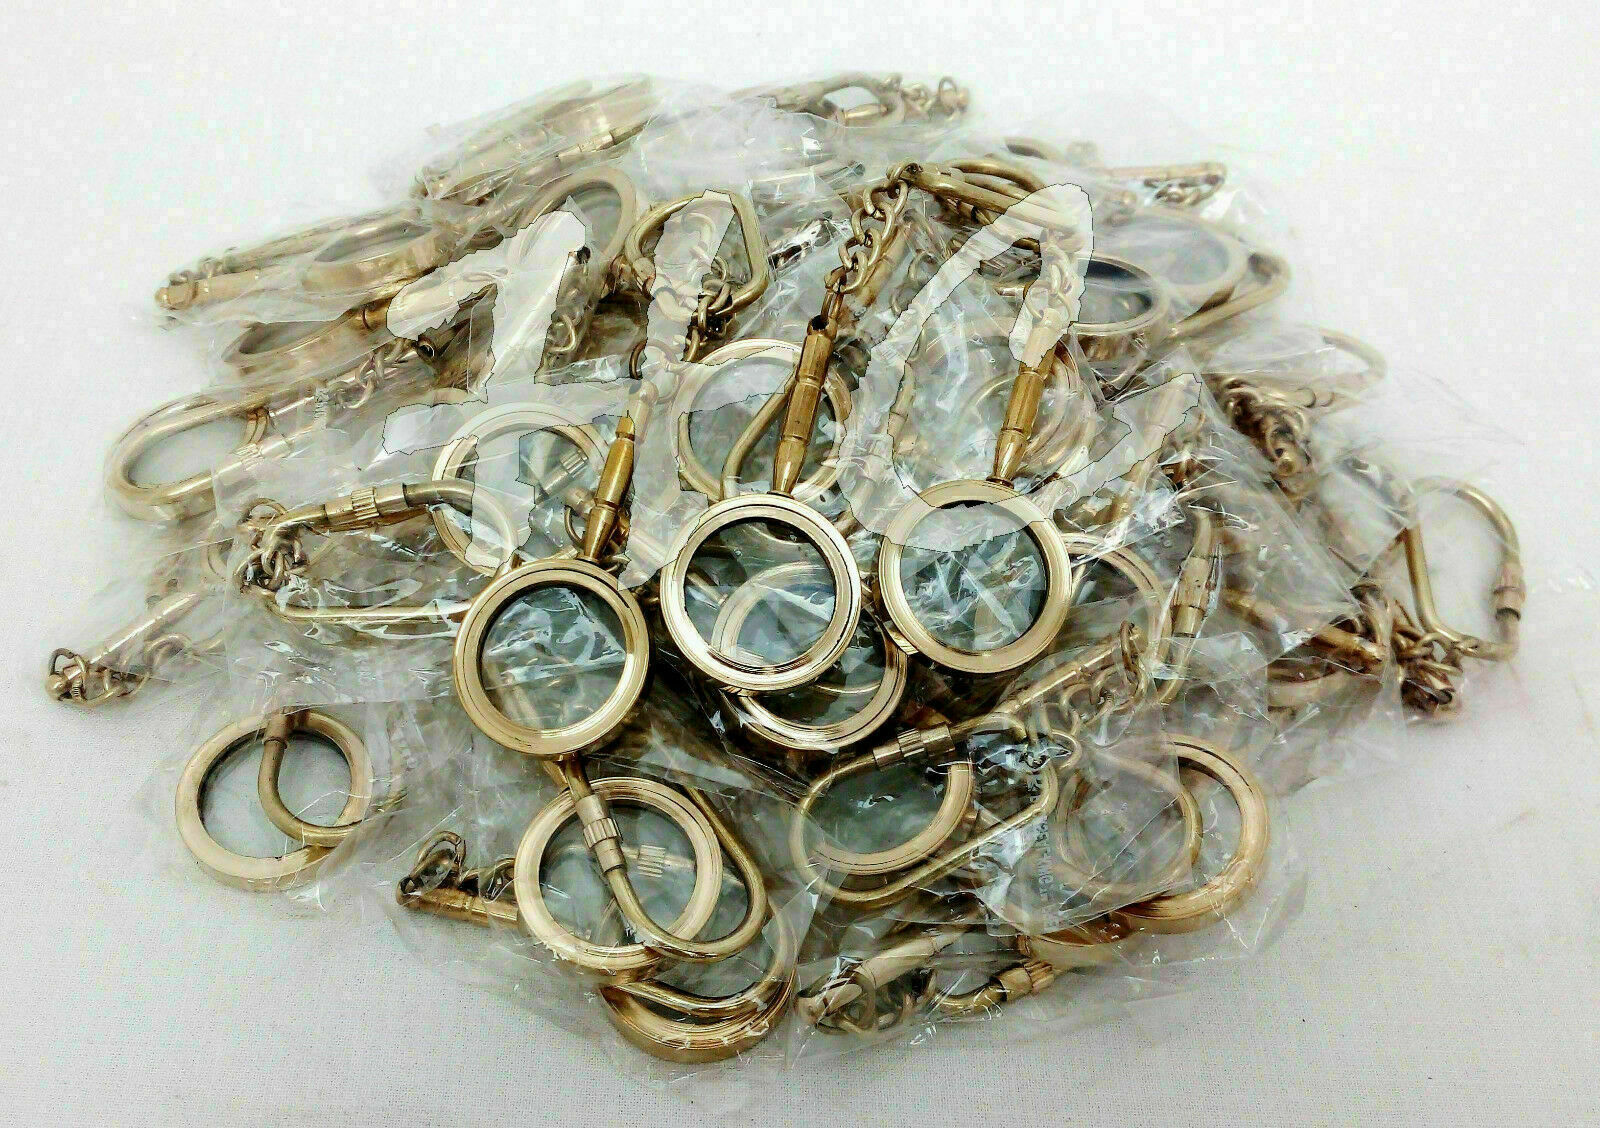 Lot of 100 pcs Antique Brass Magnifying Glass Key Chain Magnifier Key Rings Gift